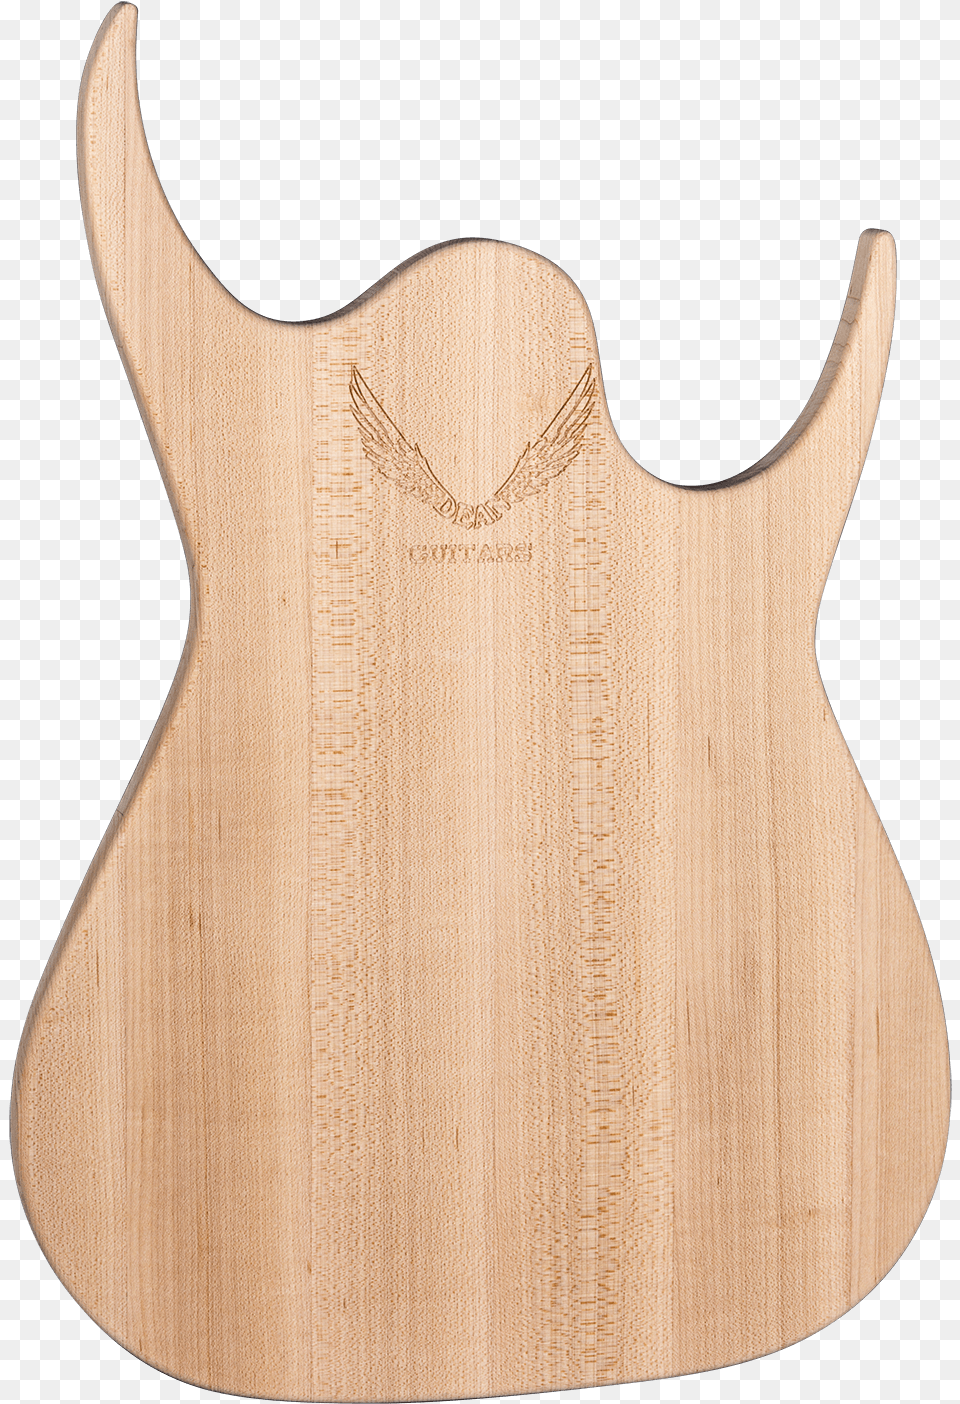 Plywood, Wood, Guitar, Musical Instrument, Home Decor Png